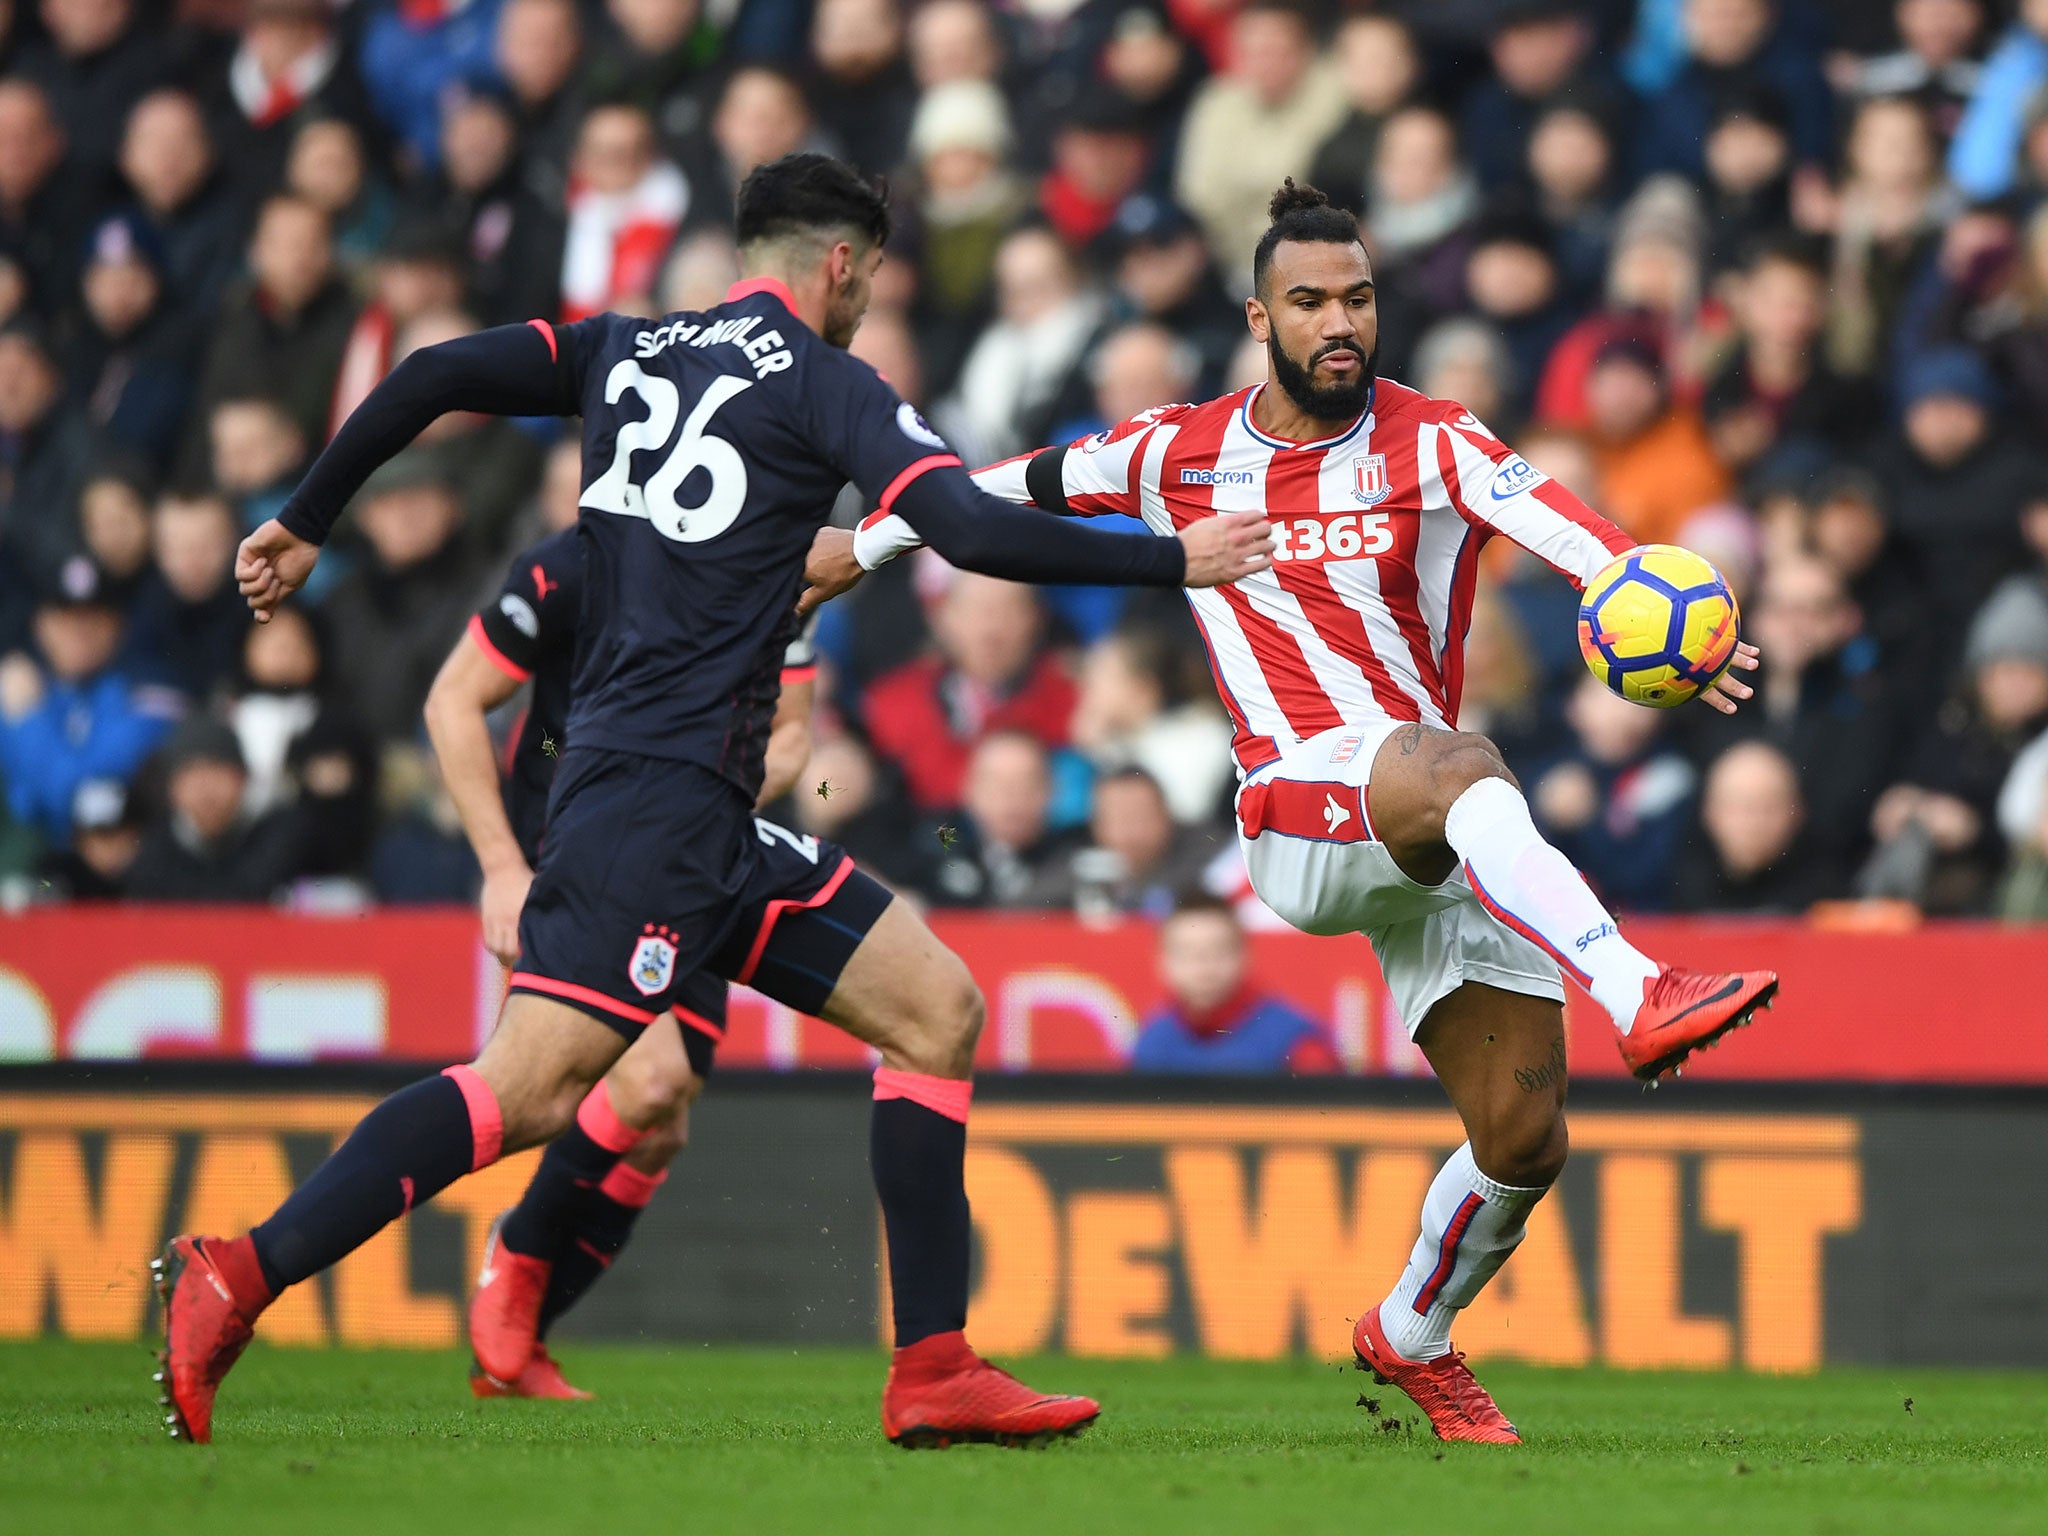 Christopher Schindler threatens as Maxim Choupo-Moting attempts to bring the ball under control